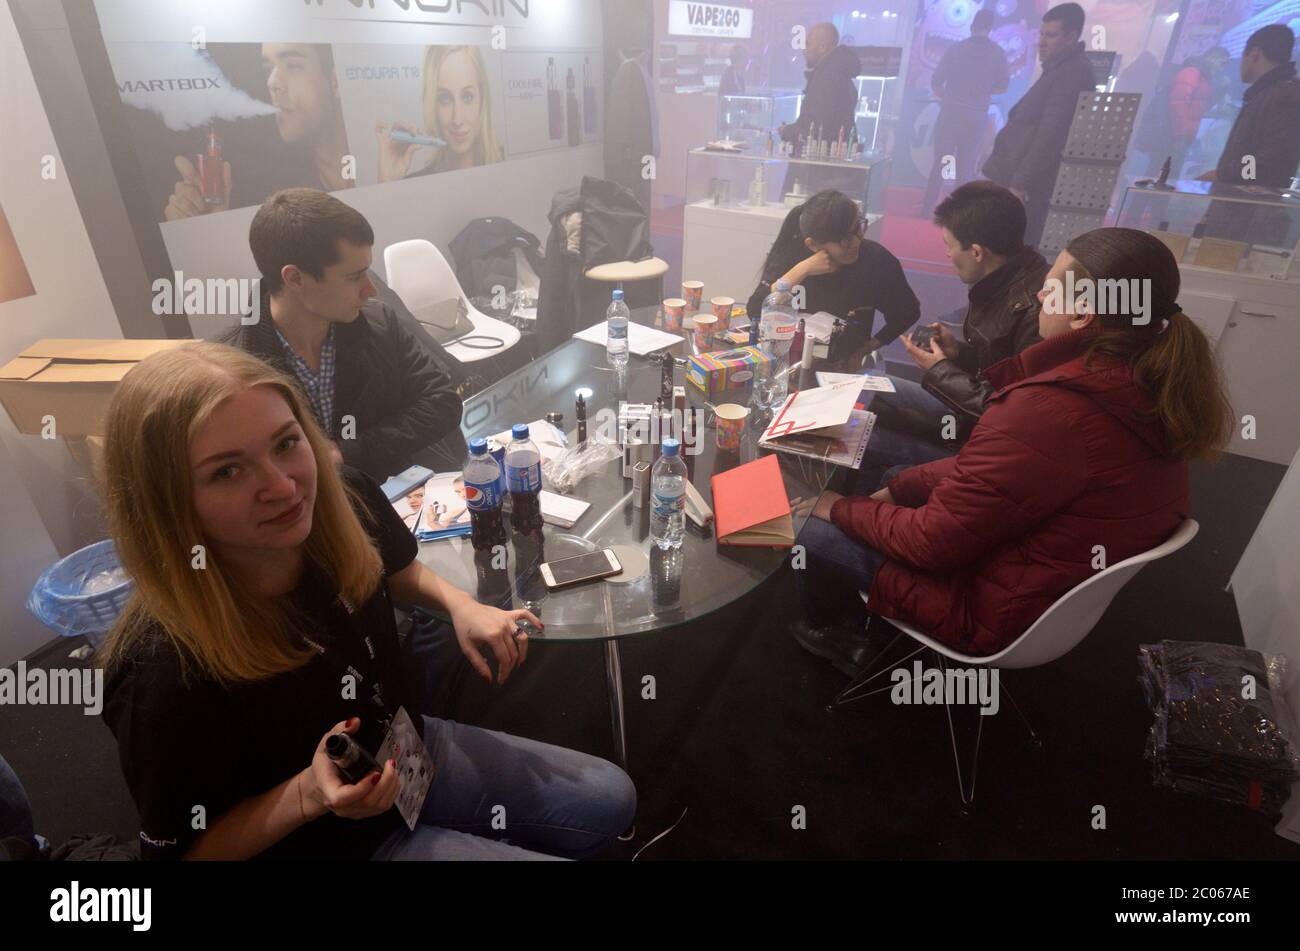 Group of young urban hipster girls and boys sit at a table with vape tanks, bottles and discussing e-cigarettes Stock Photo